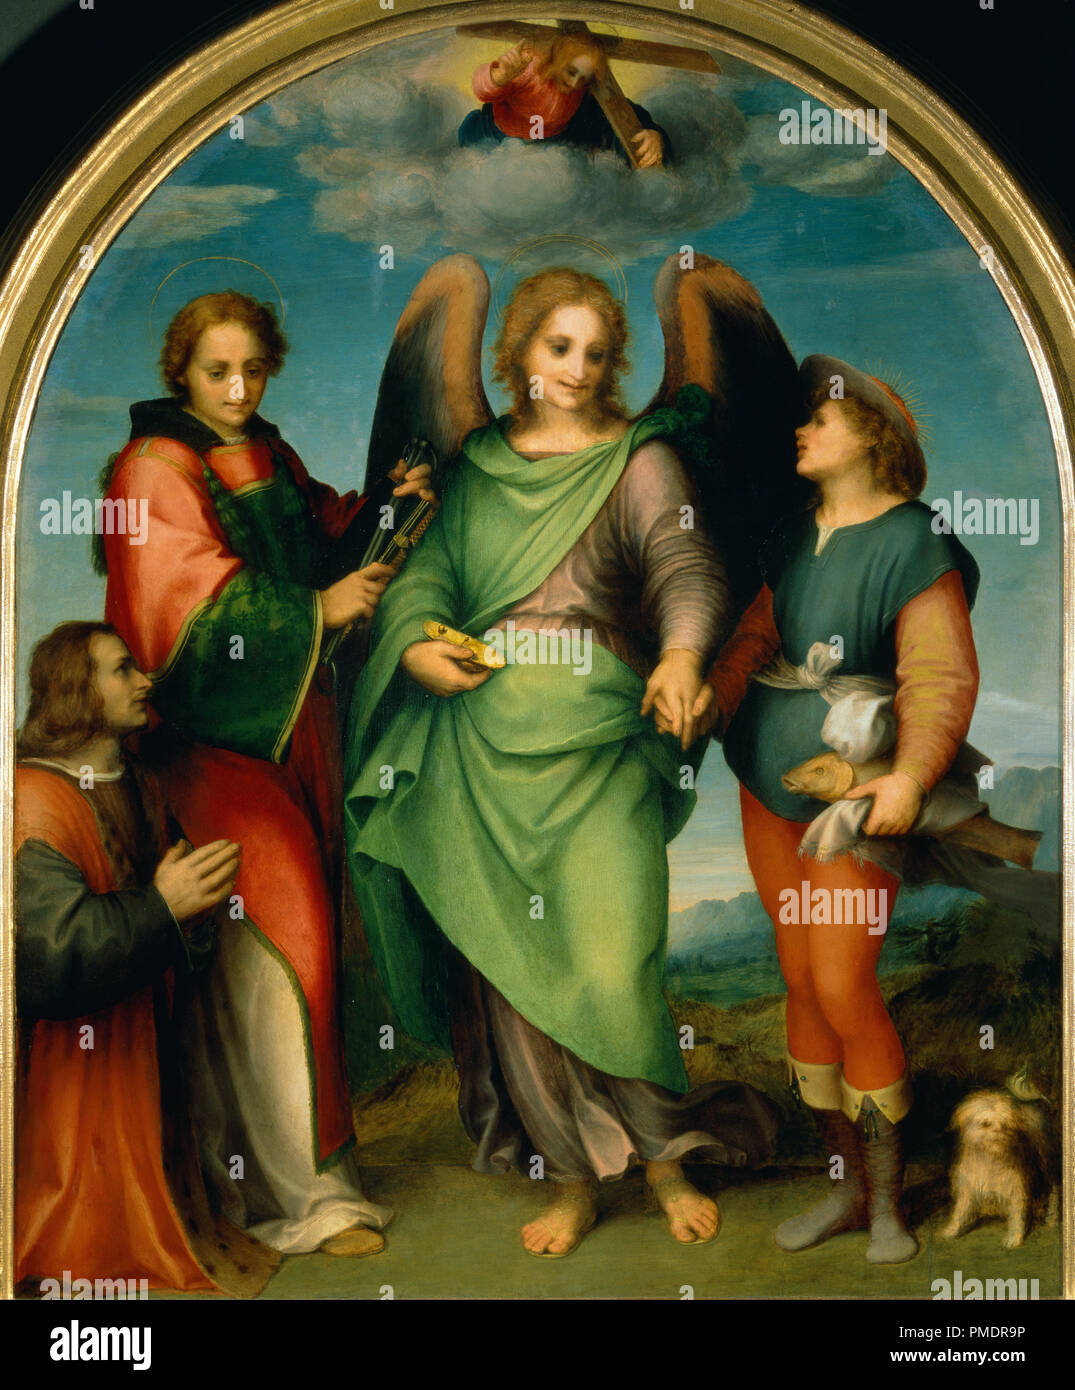 The Archangel Raphael with Tobias, St. Leonard and the Donor, Leonardo di Lorenzo Morelli. Date/Period: 1512. Painting. Oil on panel. Height: 1,780 mm (70.07 in); Width: 1,530 mm (60.23 in). Author: ANDREA DEL SARTO. SARTO, ANDREA DEL. Stock Photo